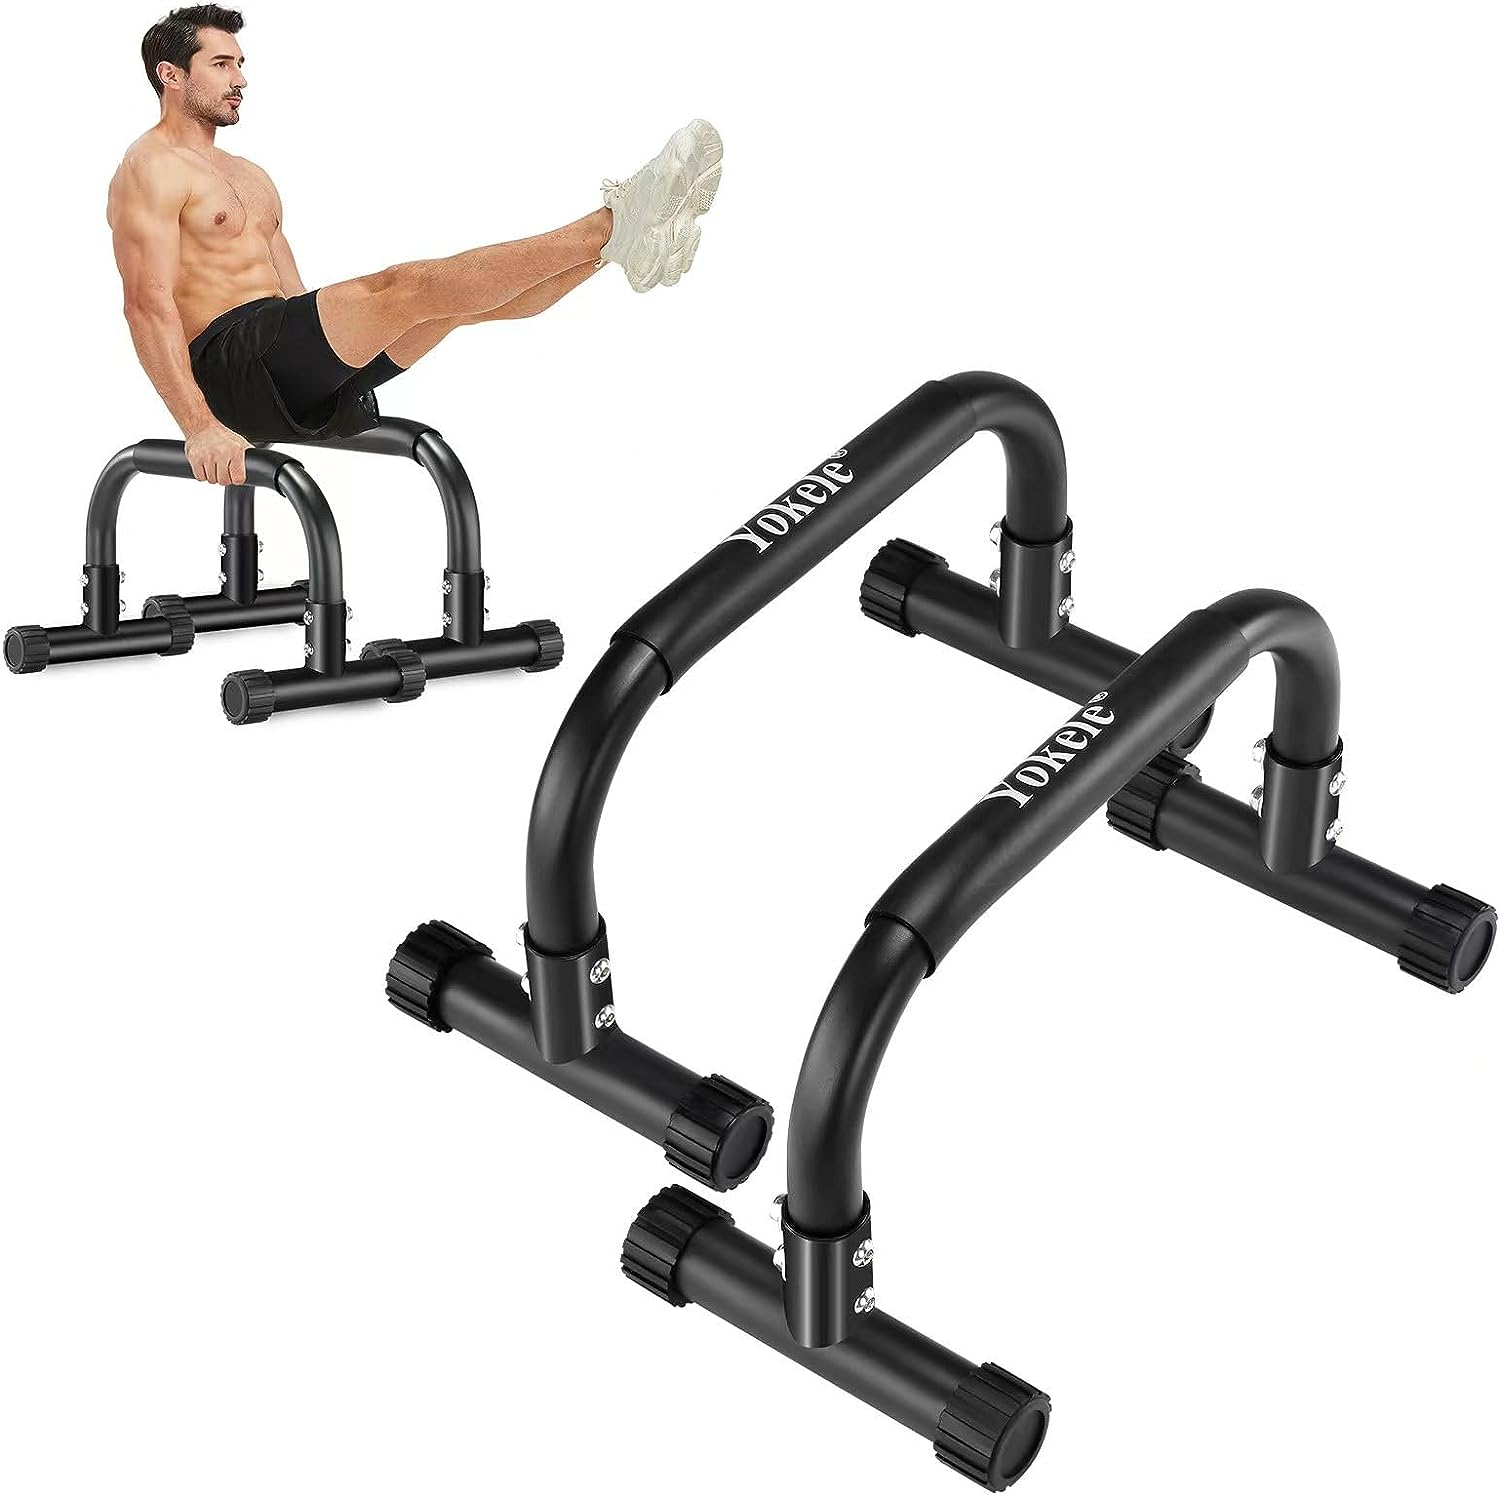 You are currently viewing Calisthenics YOKELE Push Up Bar Review